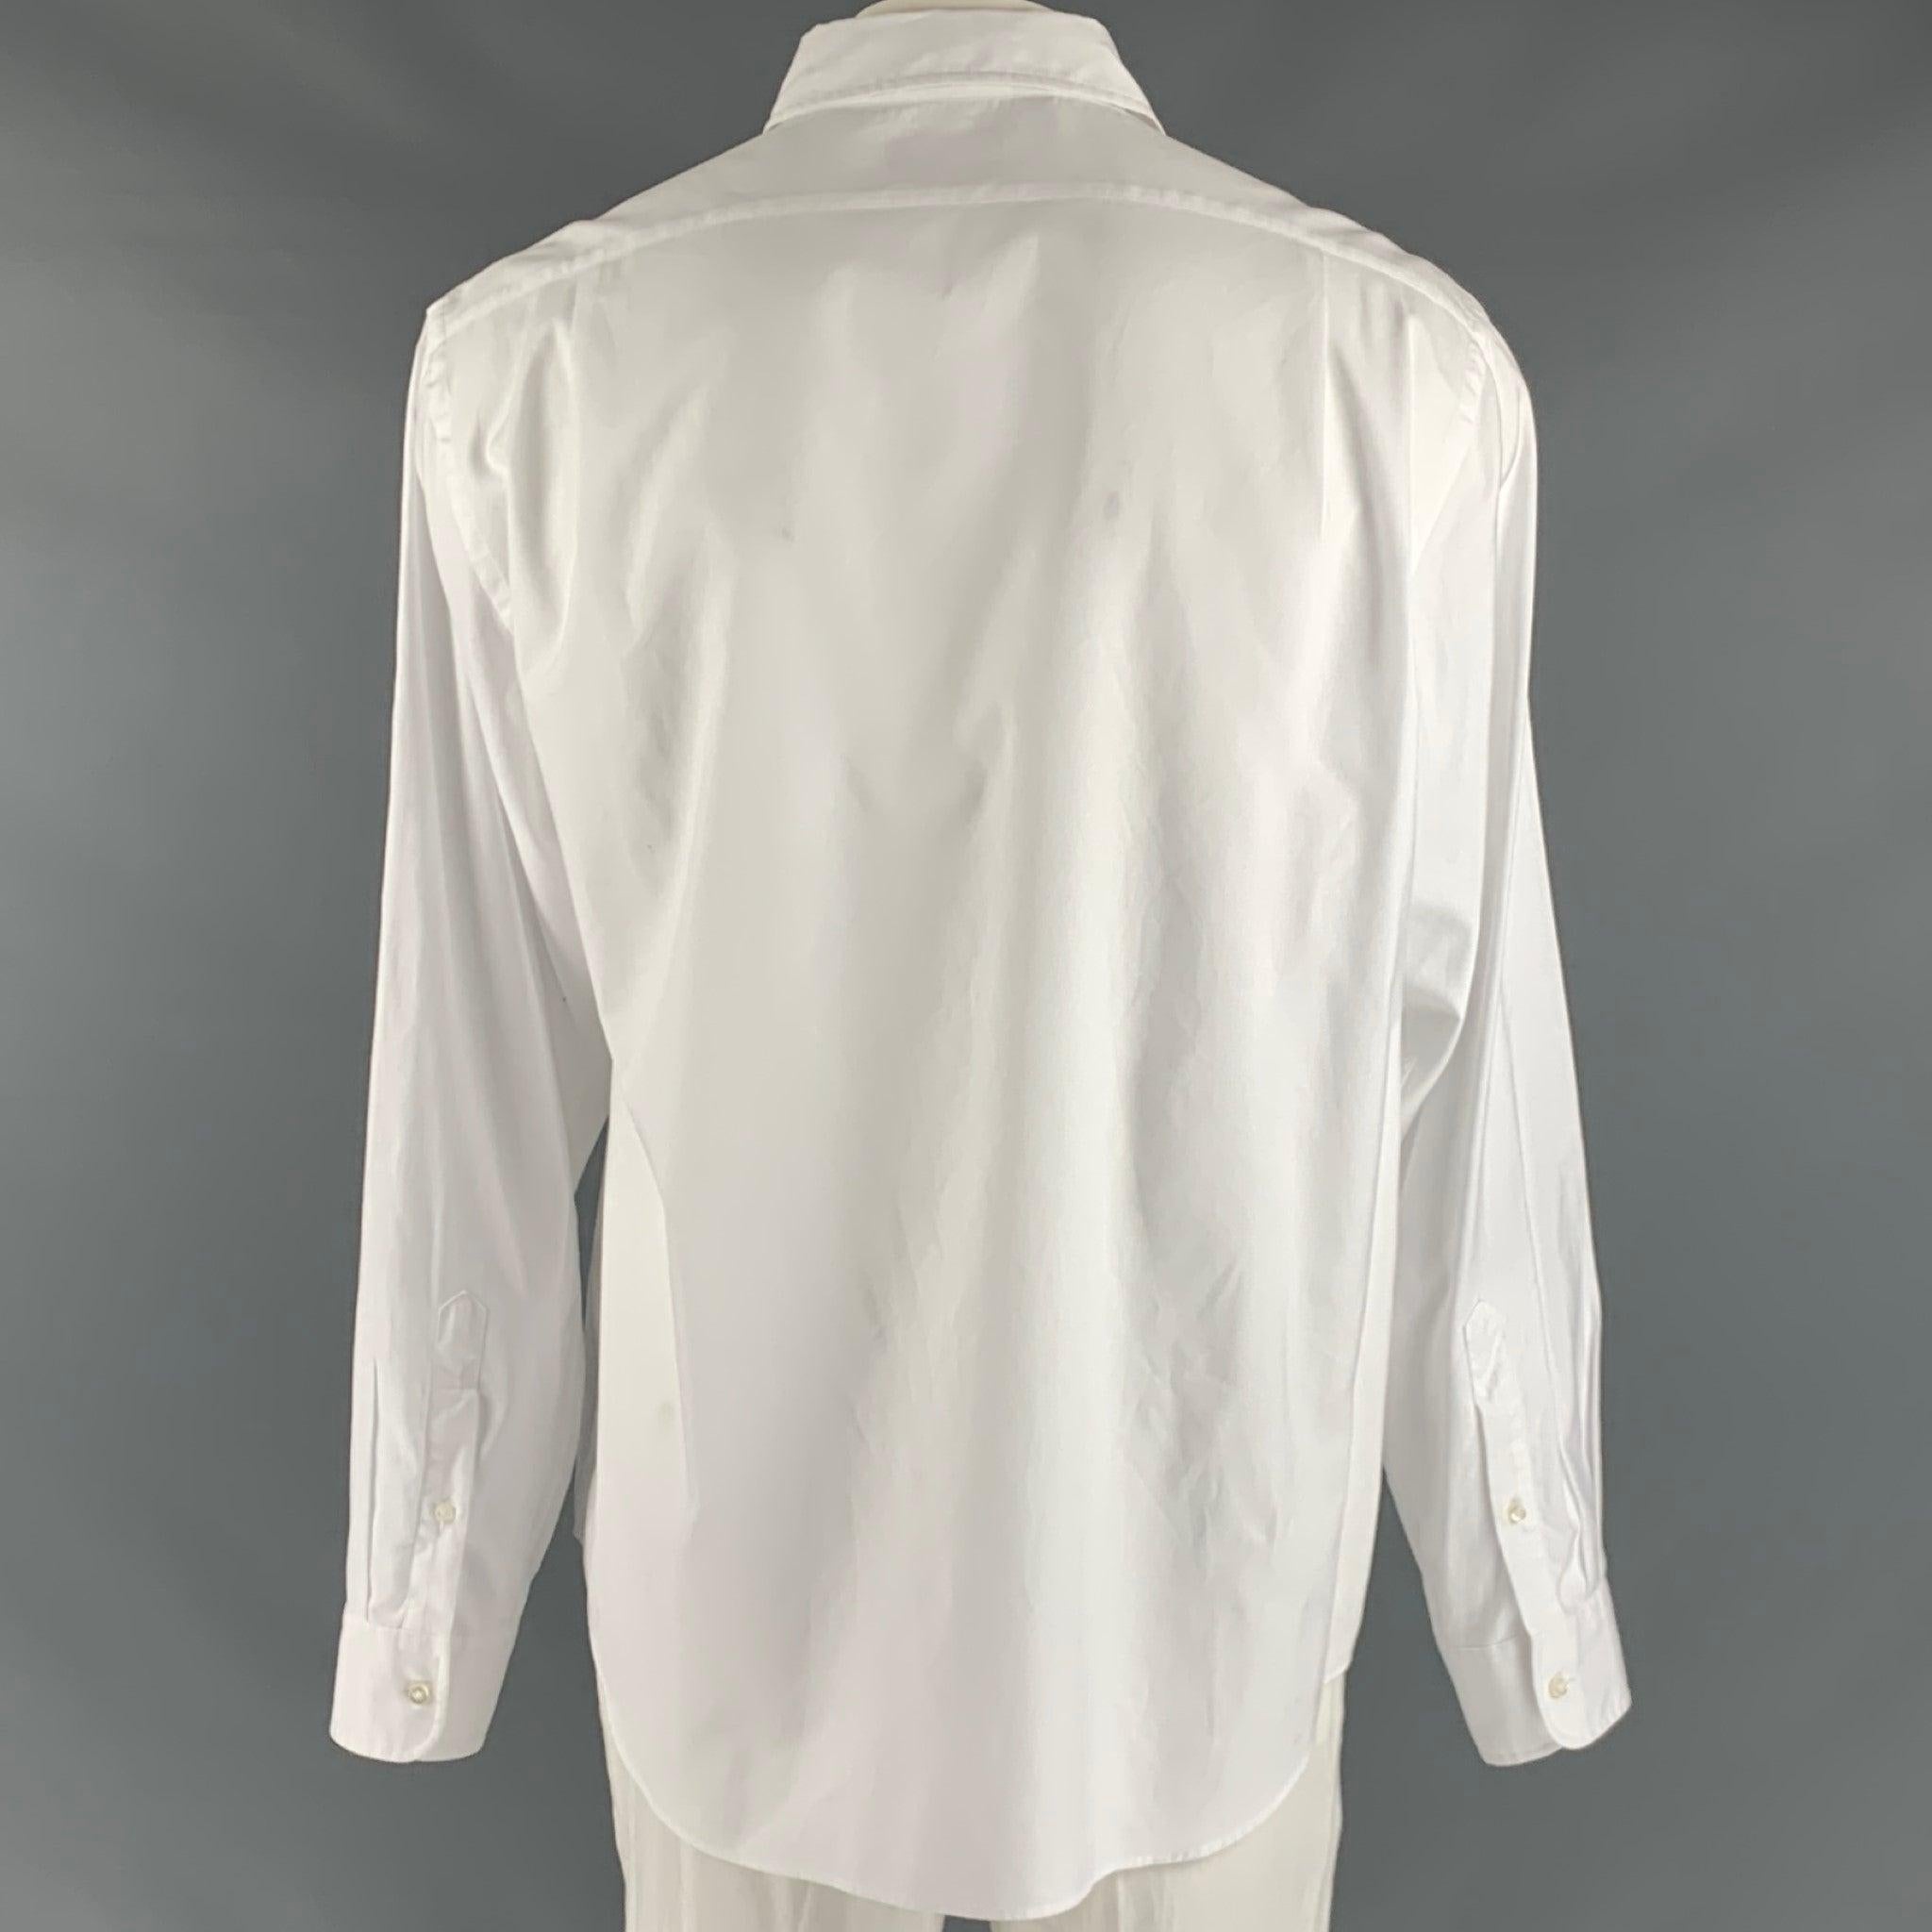 RALPH LAUREN Size XL White Cotton Button Up Long Sleeve Shirt In Good Condition For Sale In San Francisco, CA